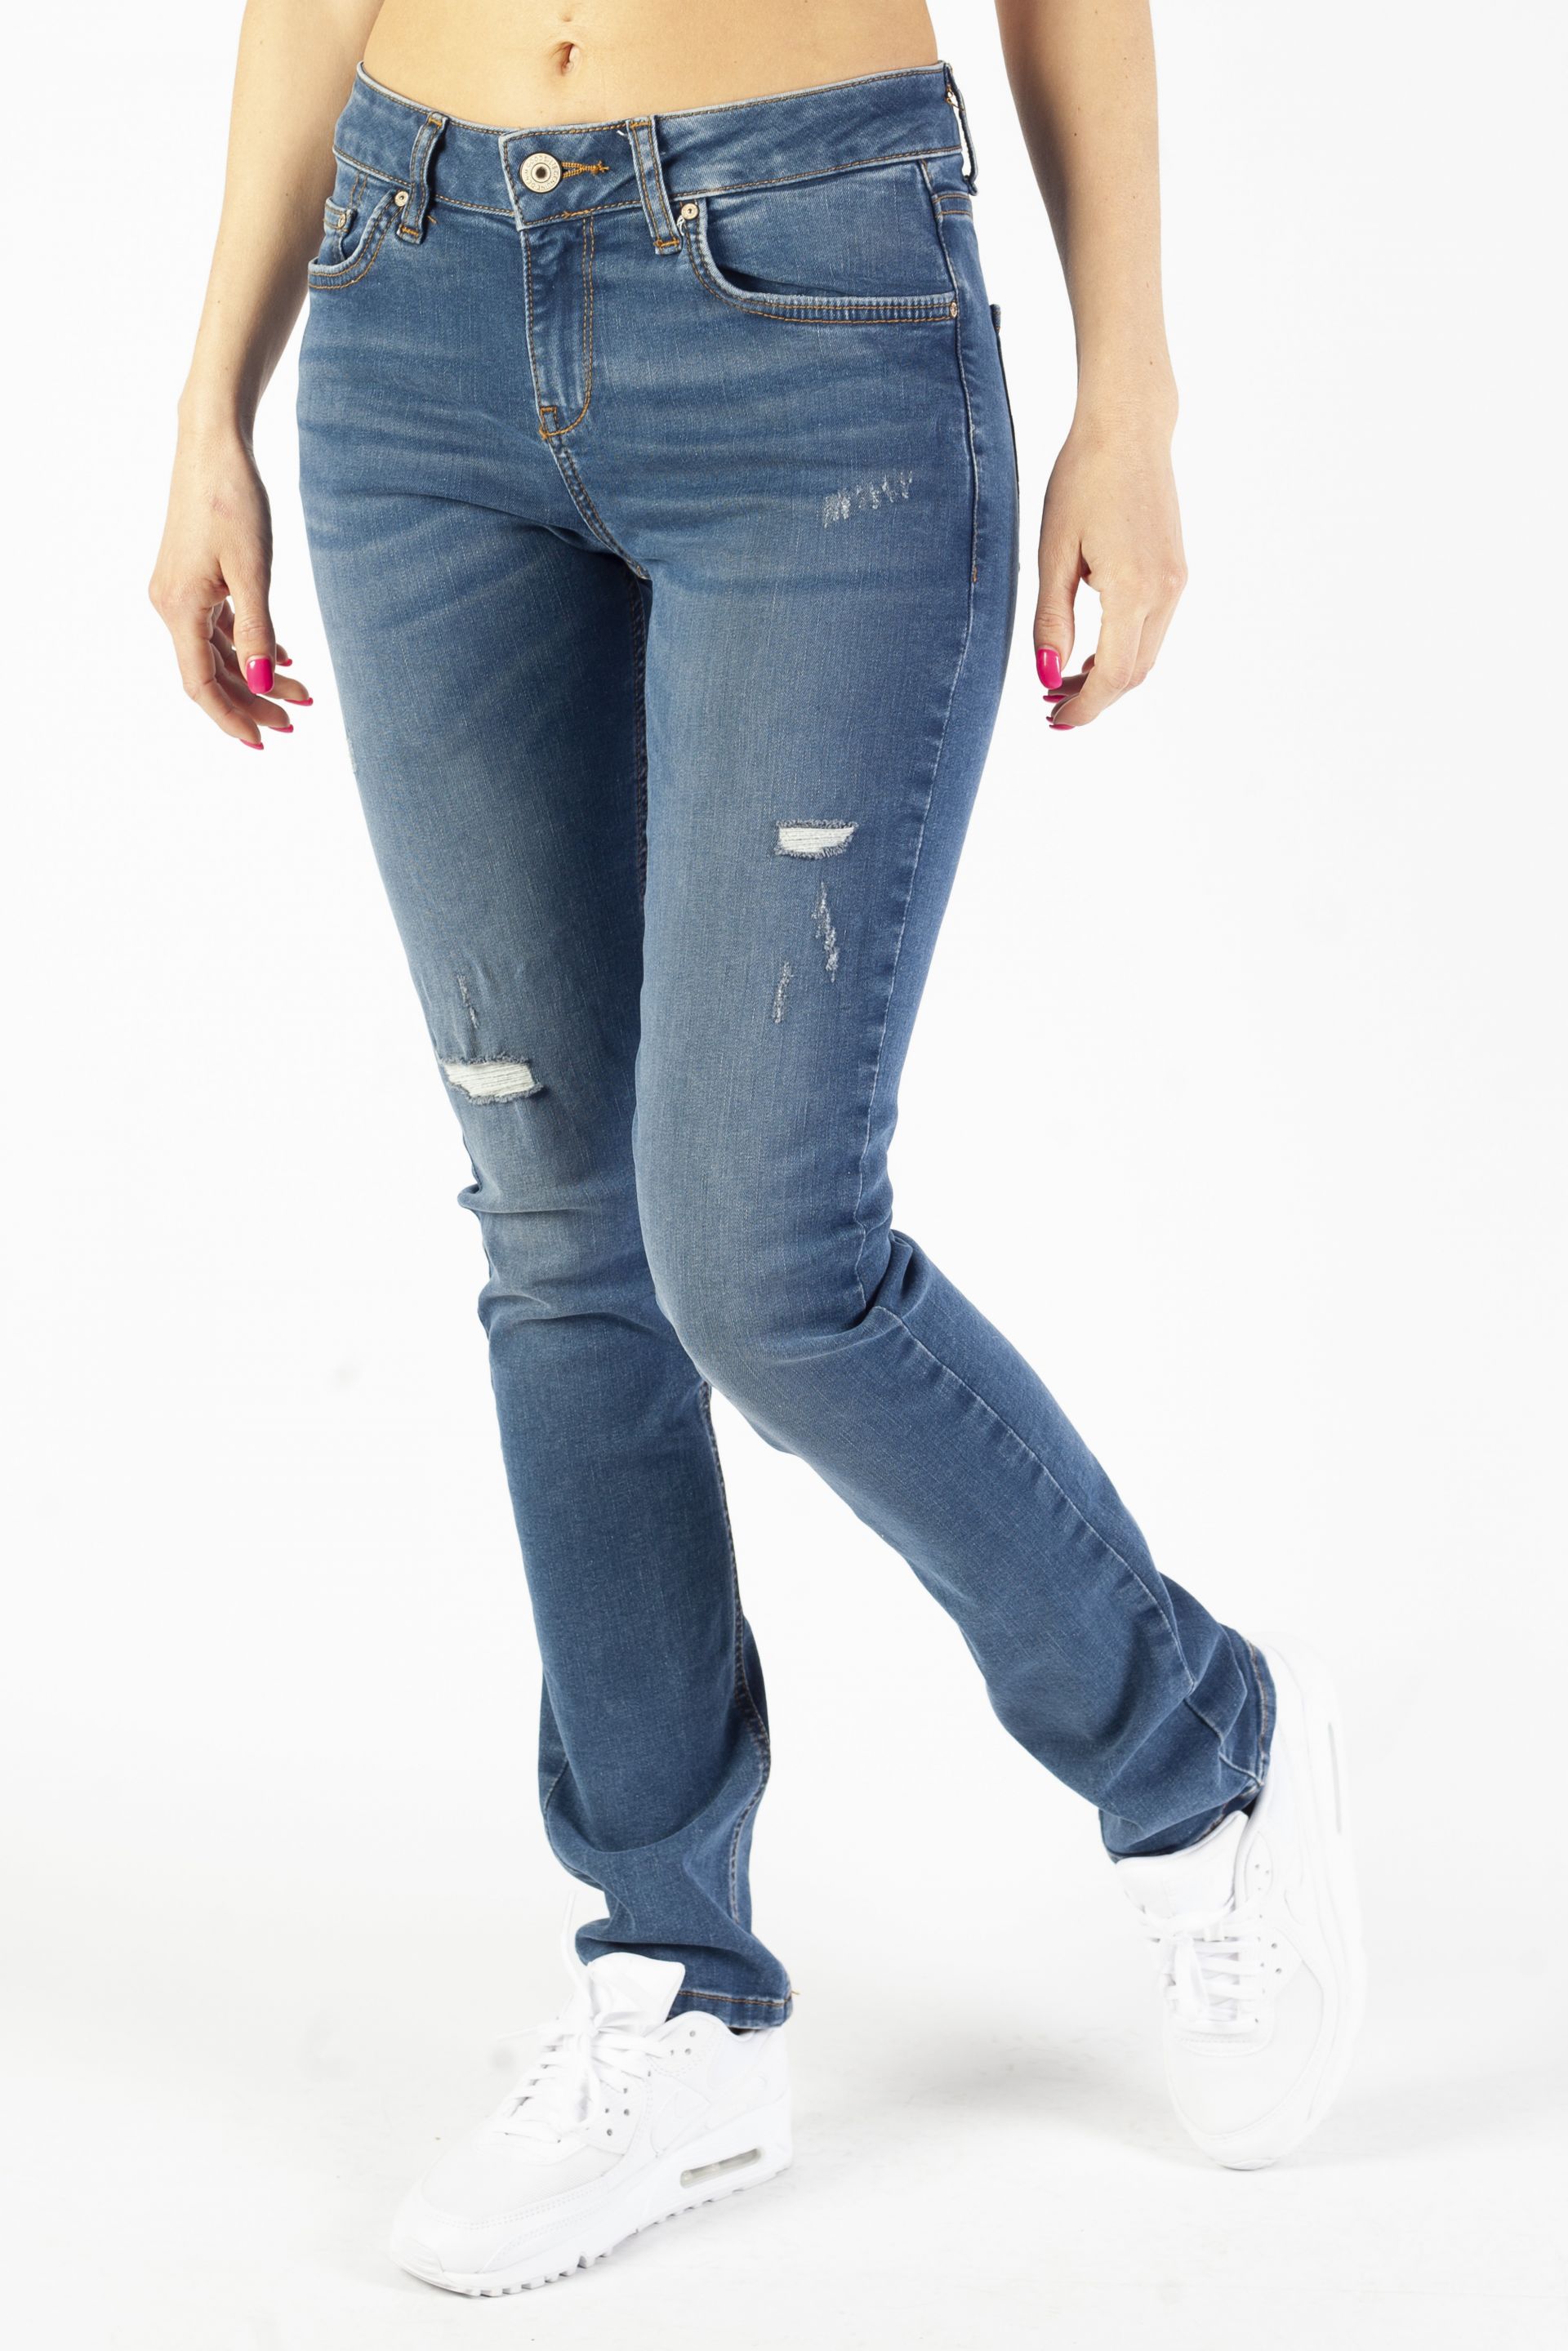 Jeans LTB JEANS 1009-51062-15138-53699